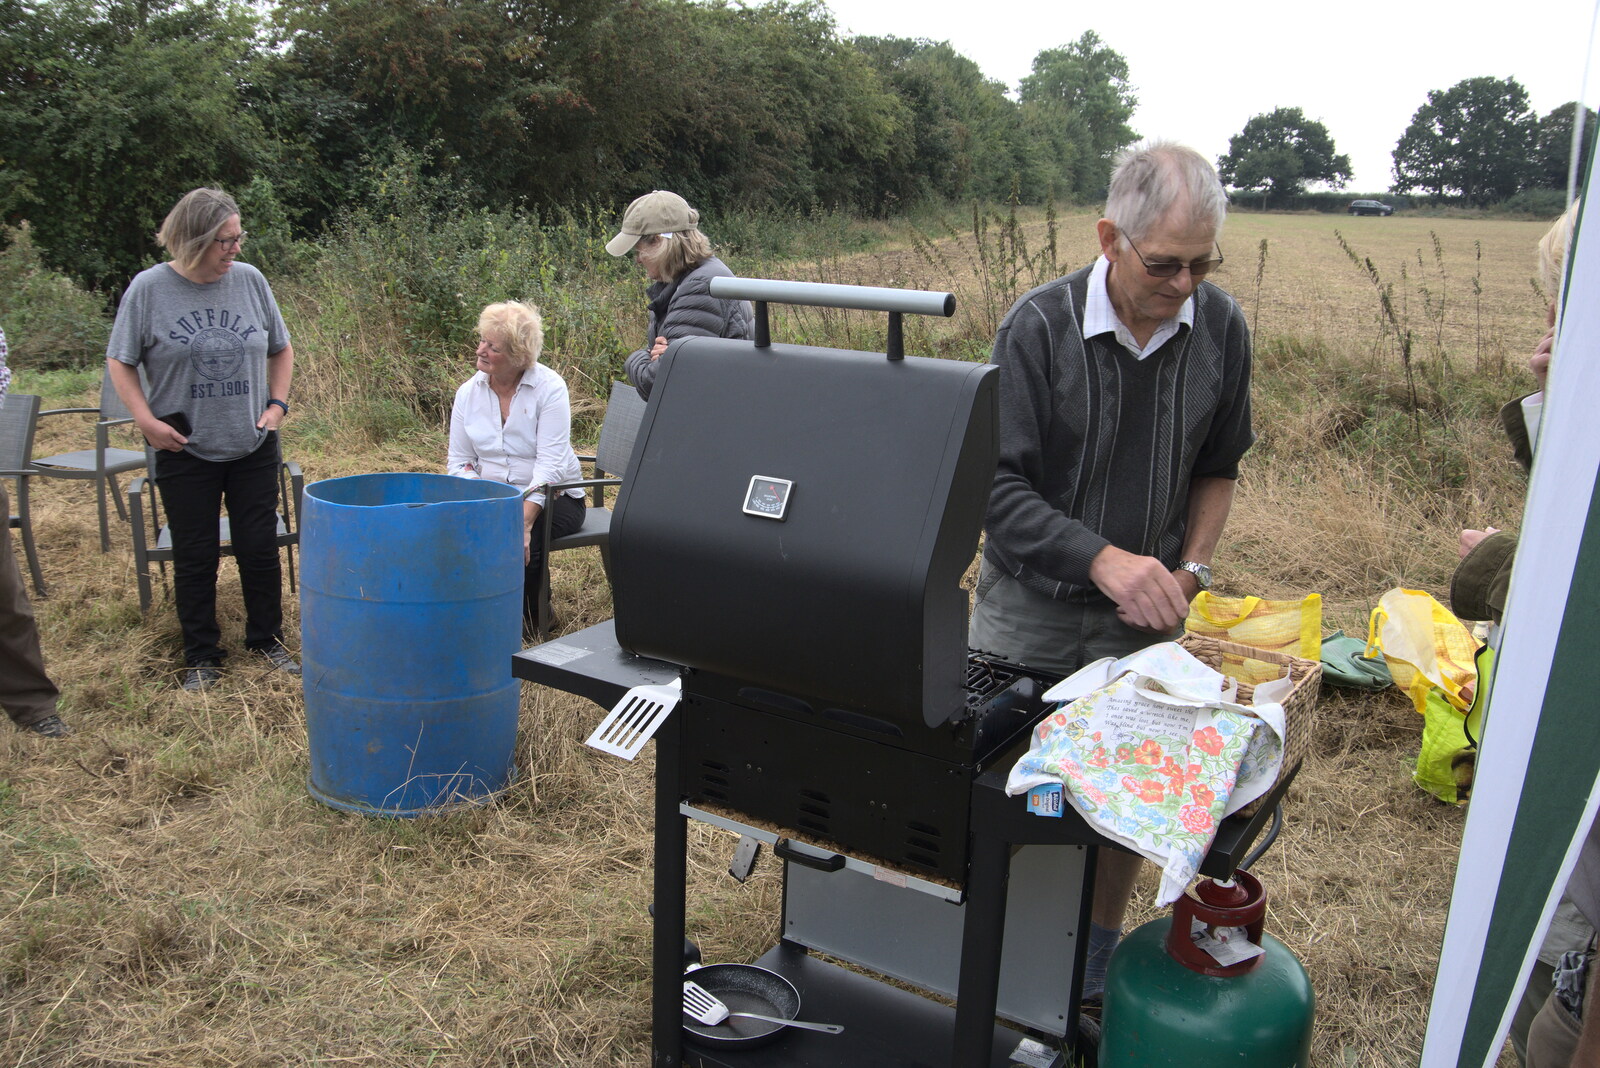 Vintage Tractor Ploughing, Thrandeston, Suffolk - 26th September 2021: Uncle Mick's on barbeque duty